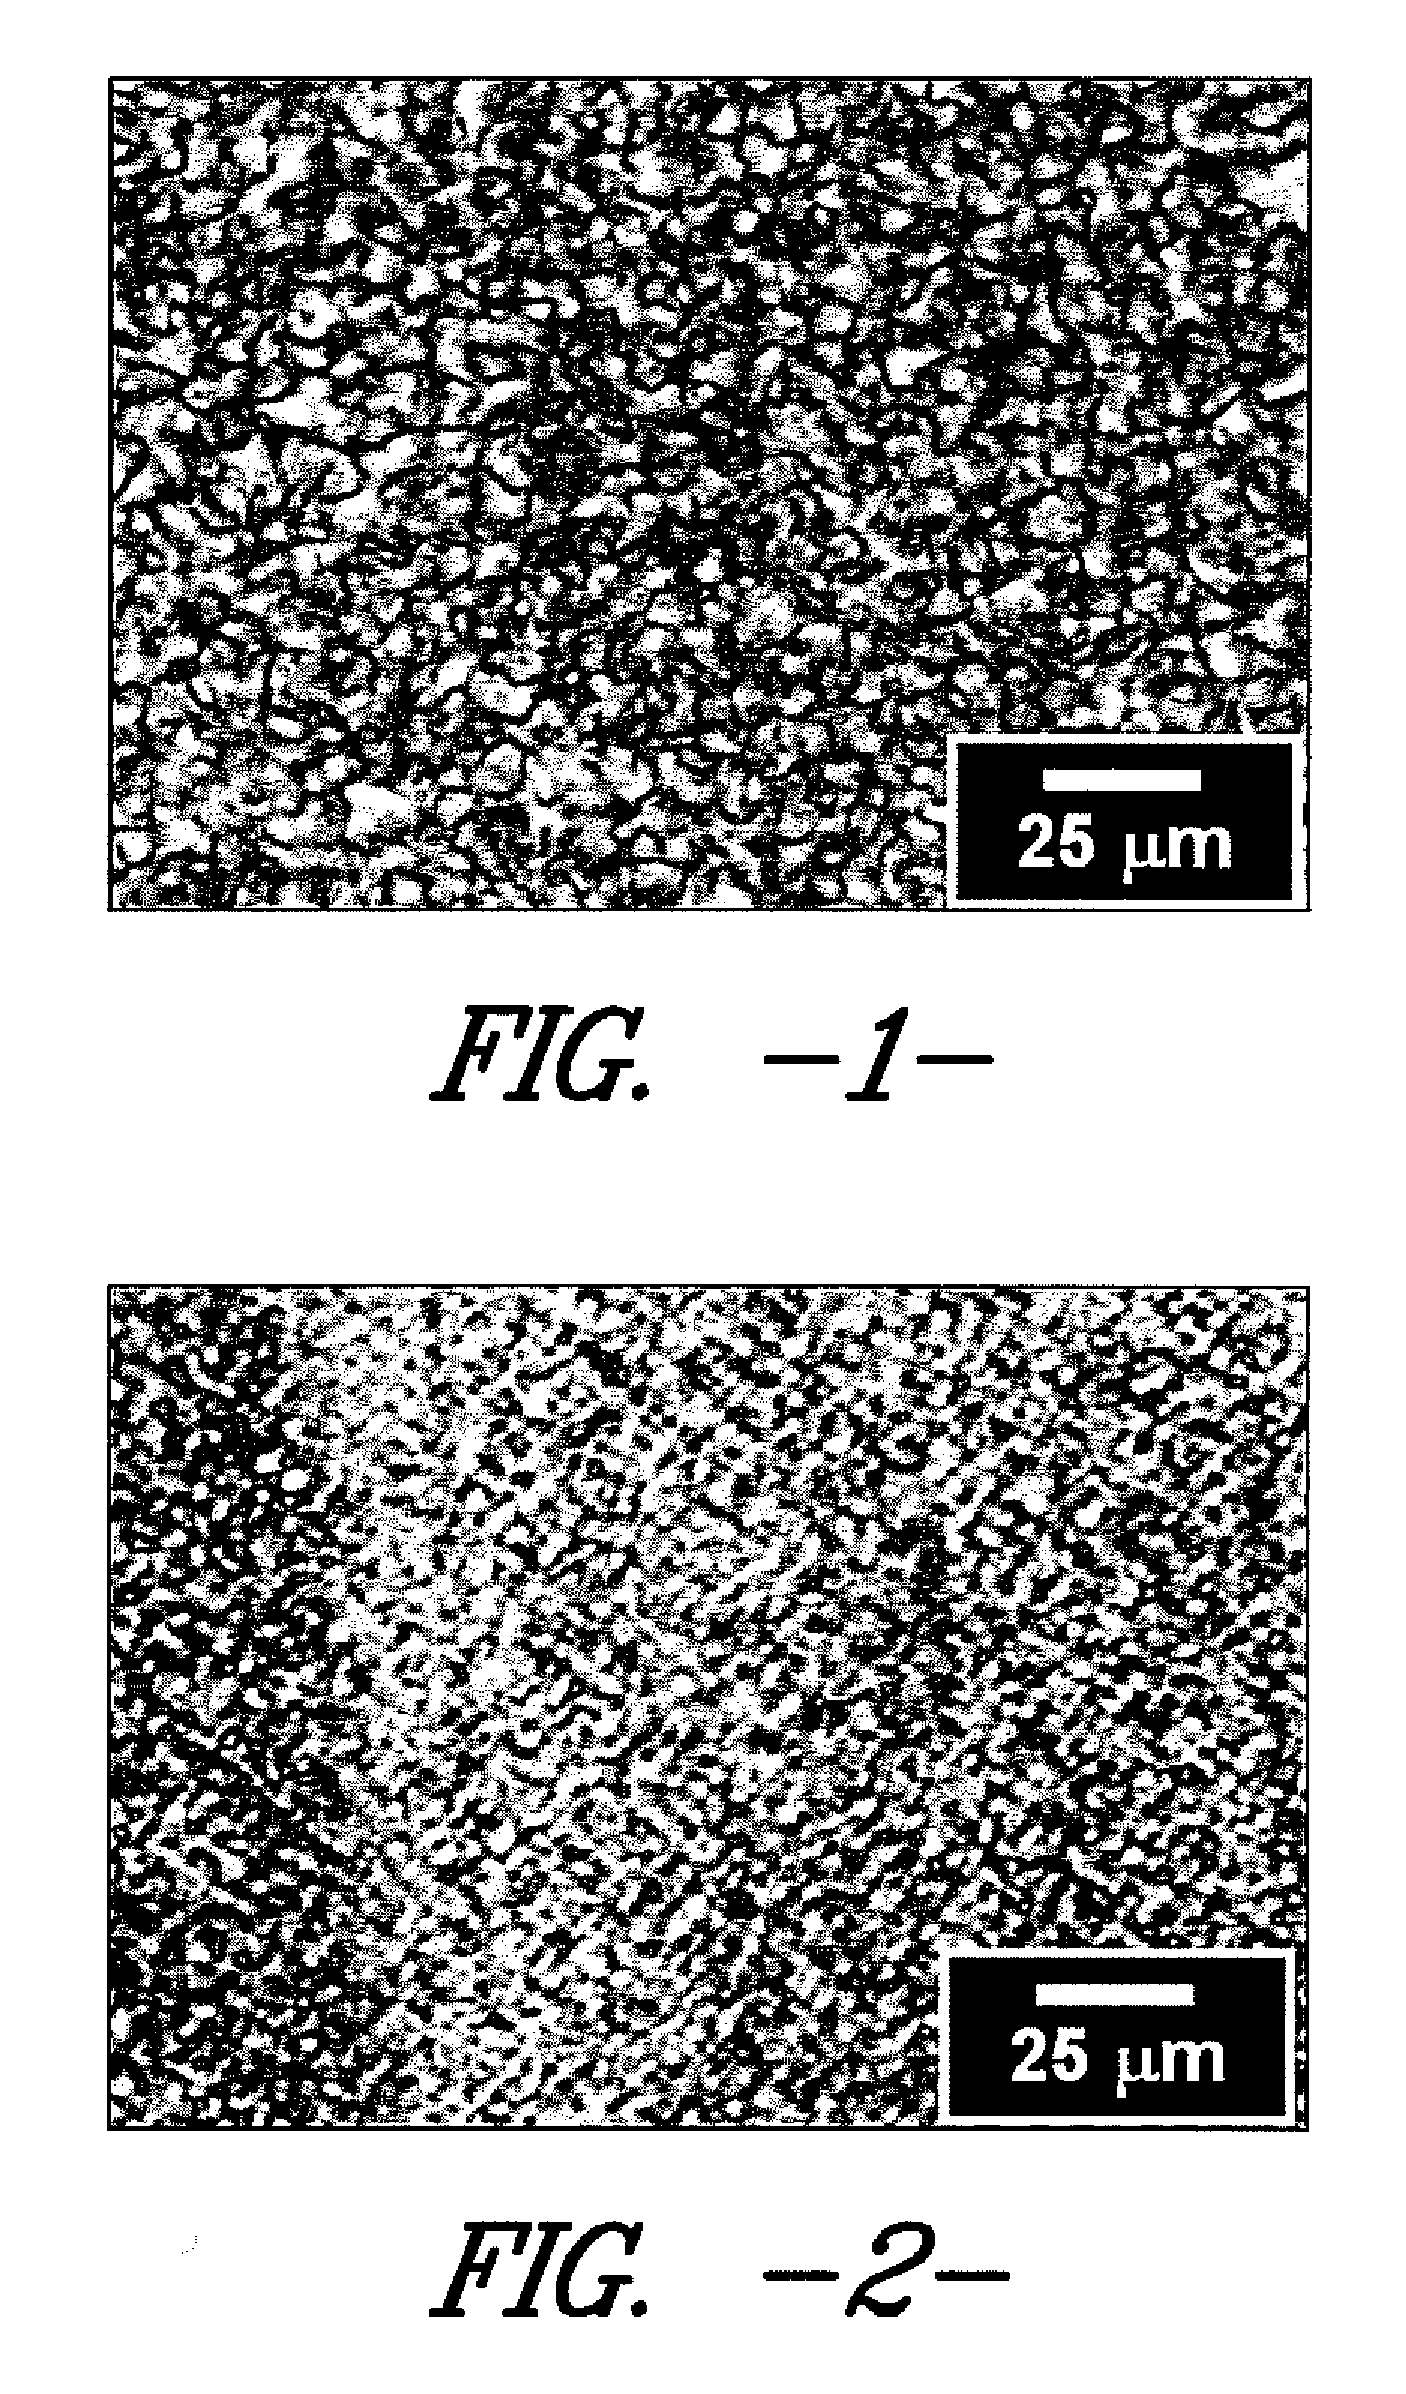 Polymer compositions comprising nucleating or clarifying agents and articles made using such compositions